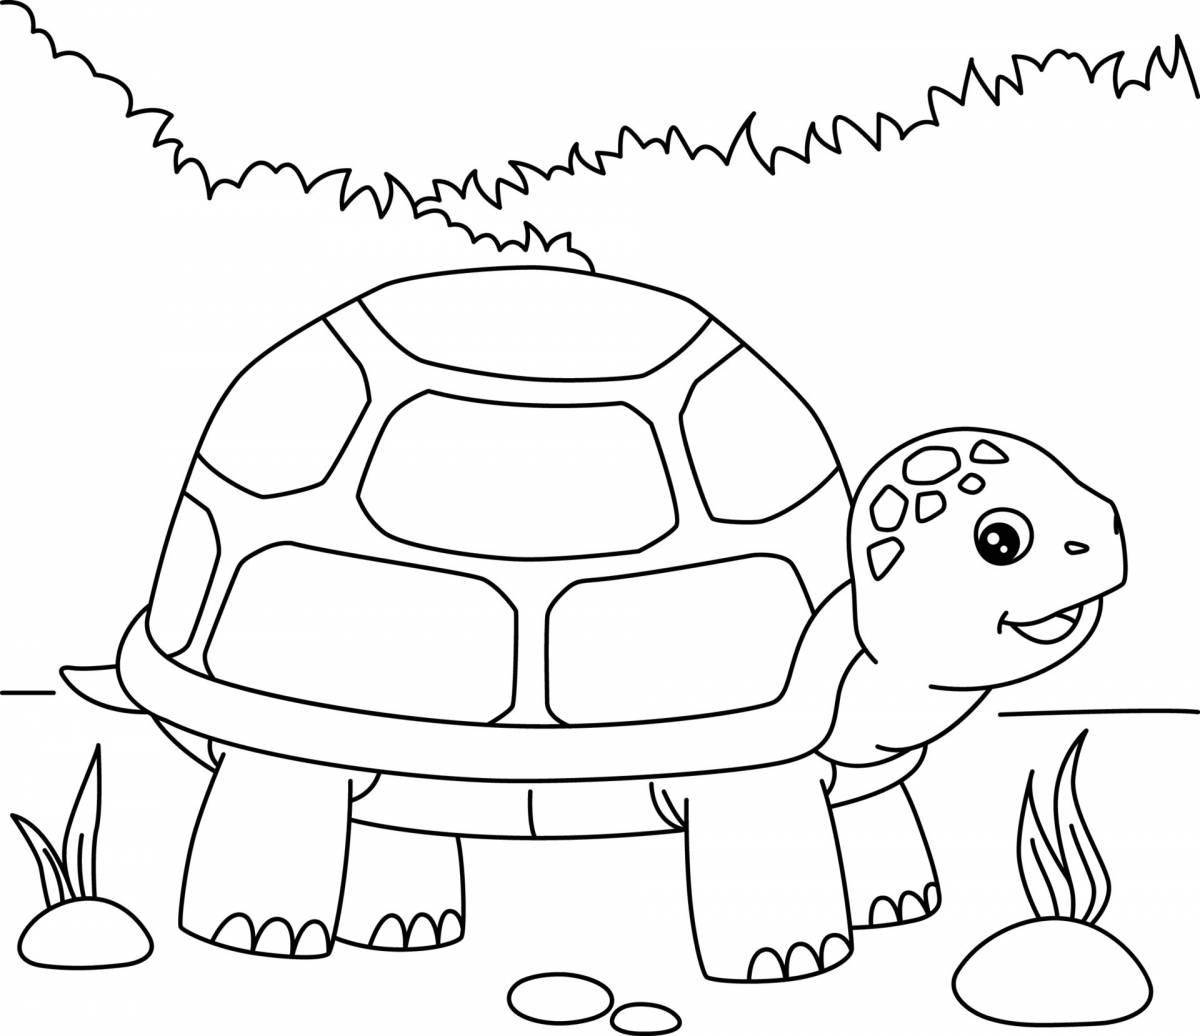 Playful minecraft turtle coloring page